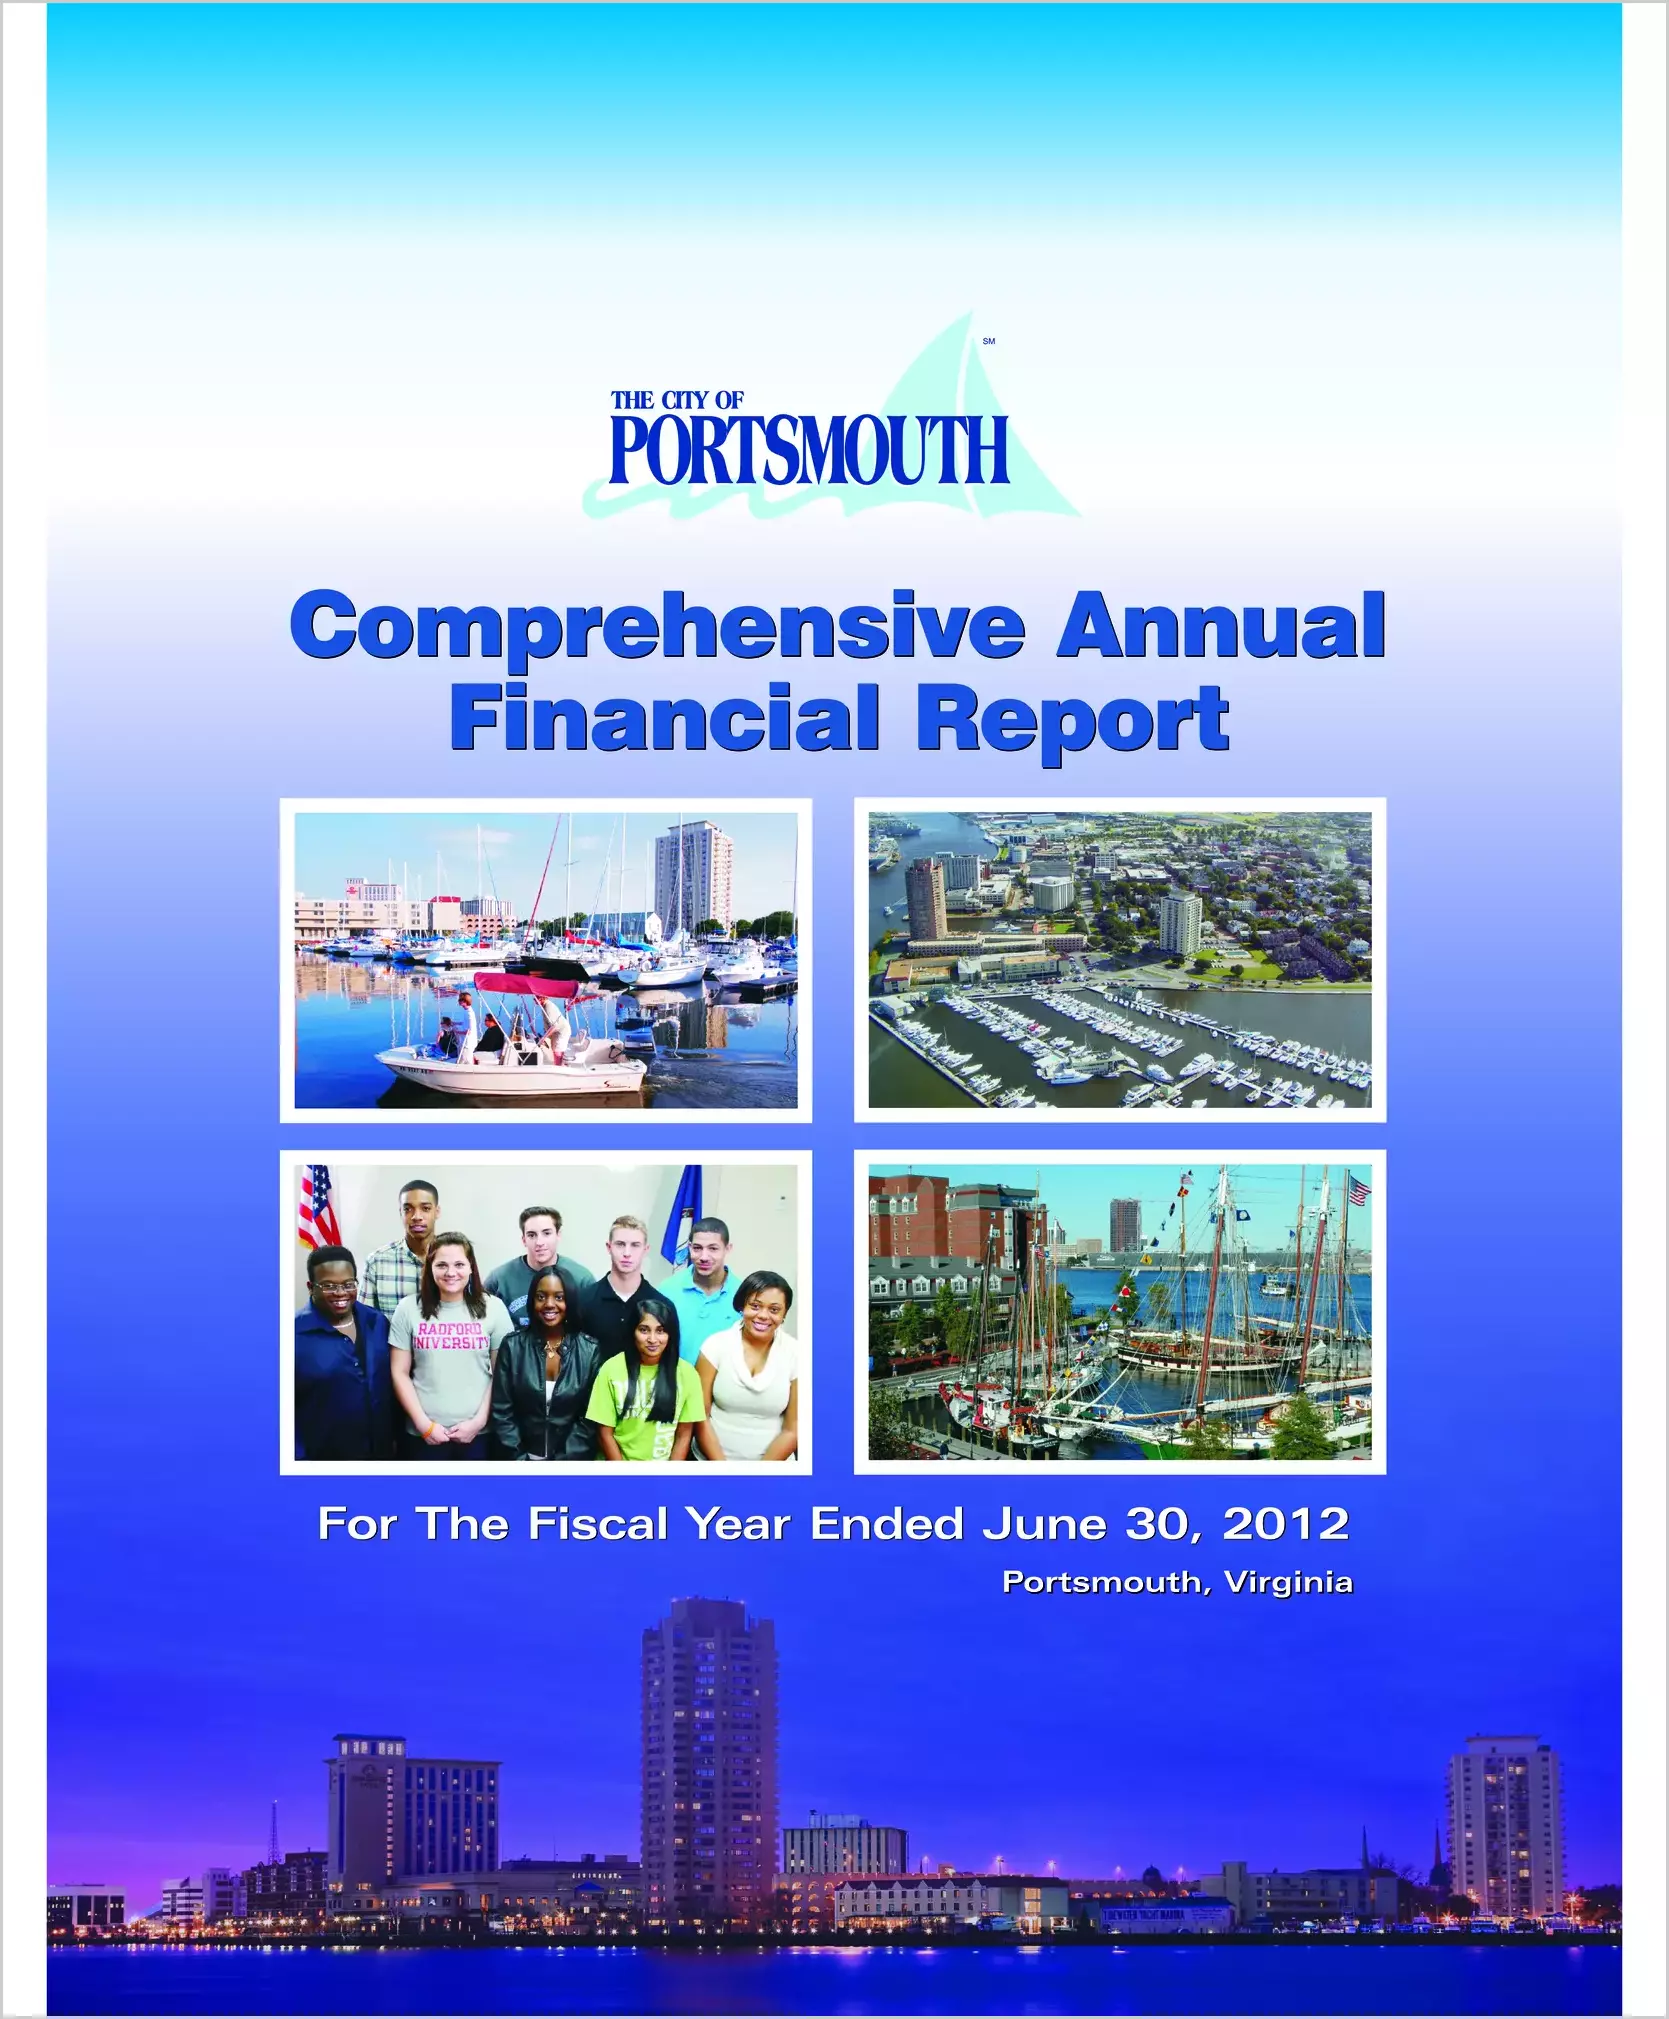 2012 Annual Financial Report for City of Portsmouth